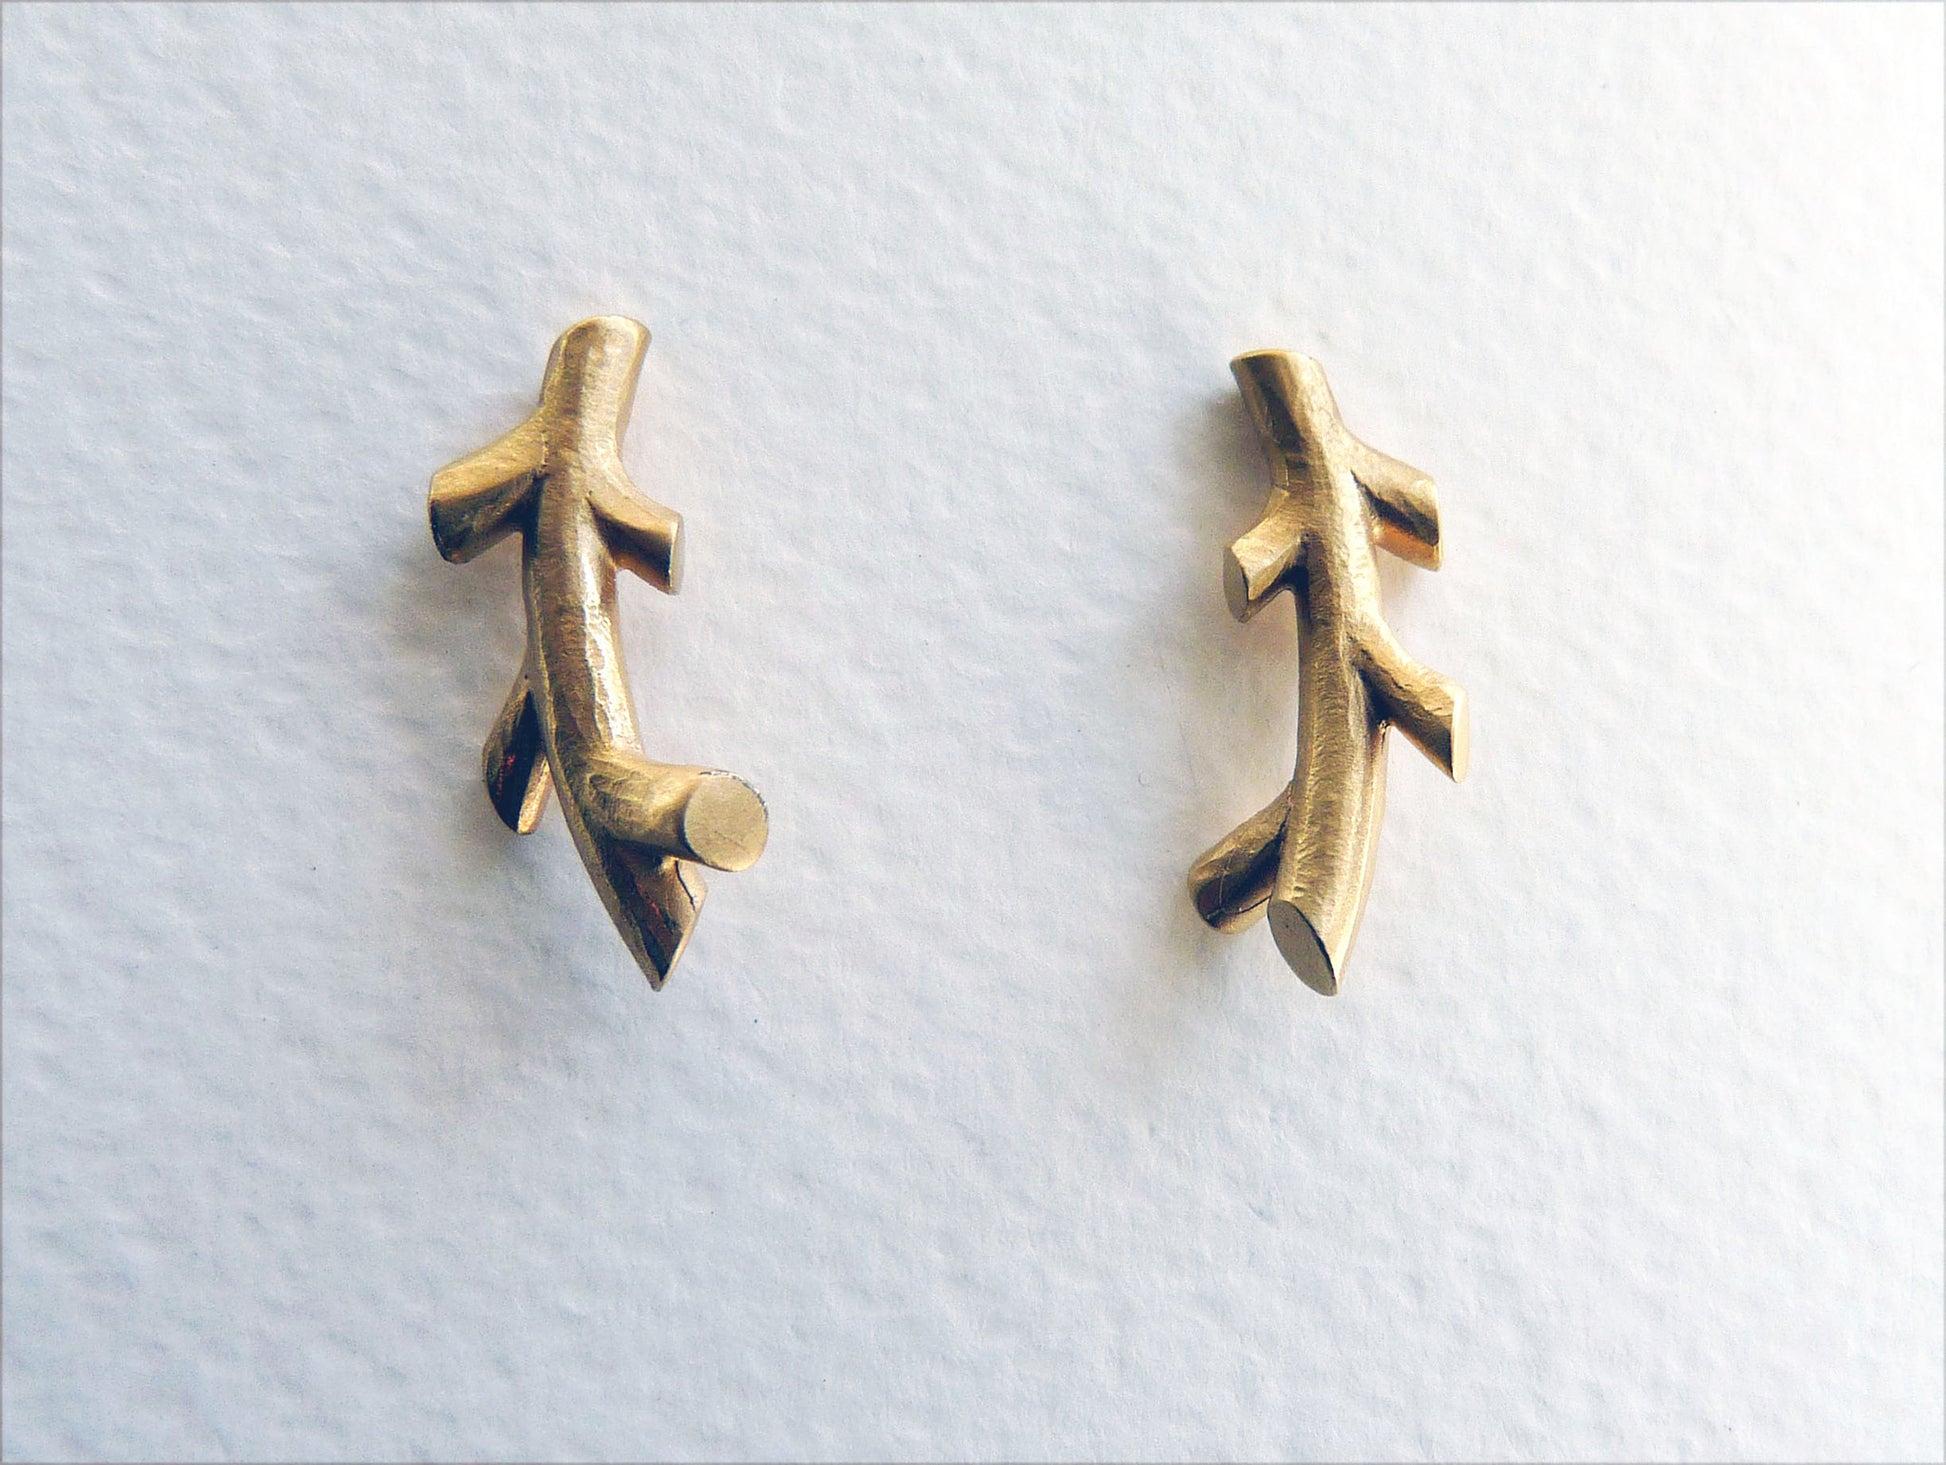 Blossoming, branch, jewellery, jewelry, earrings, studs, sterling, silver, 18ct, gold, nature, natural